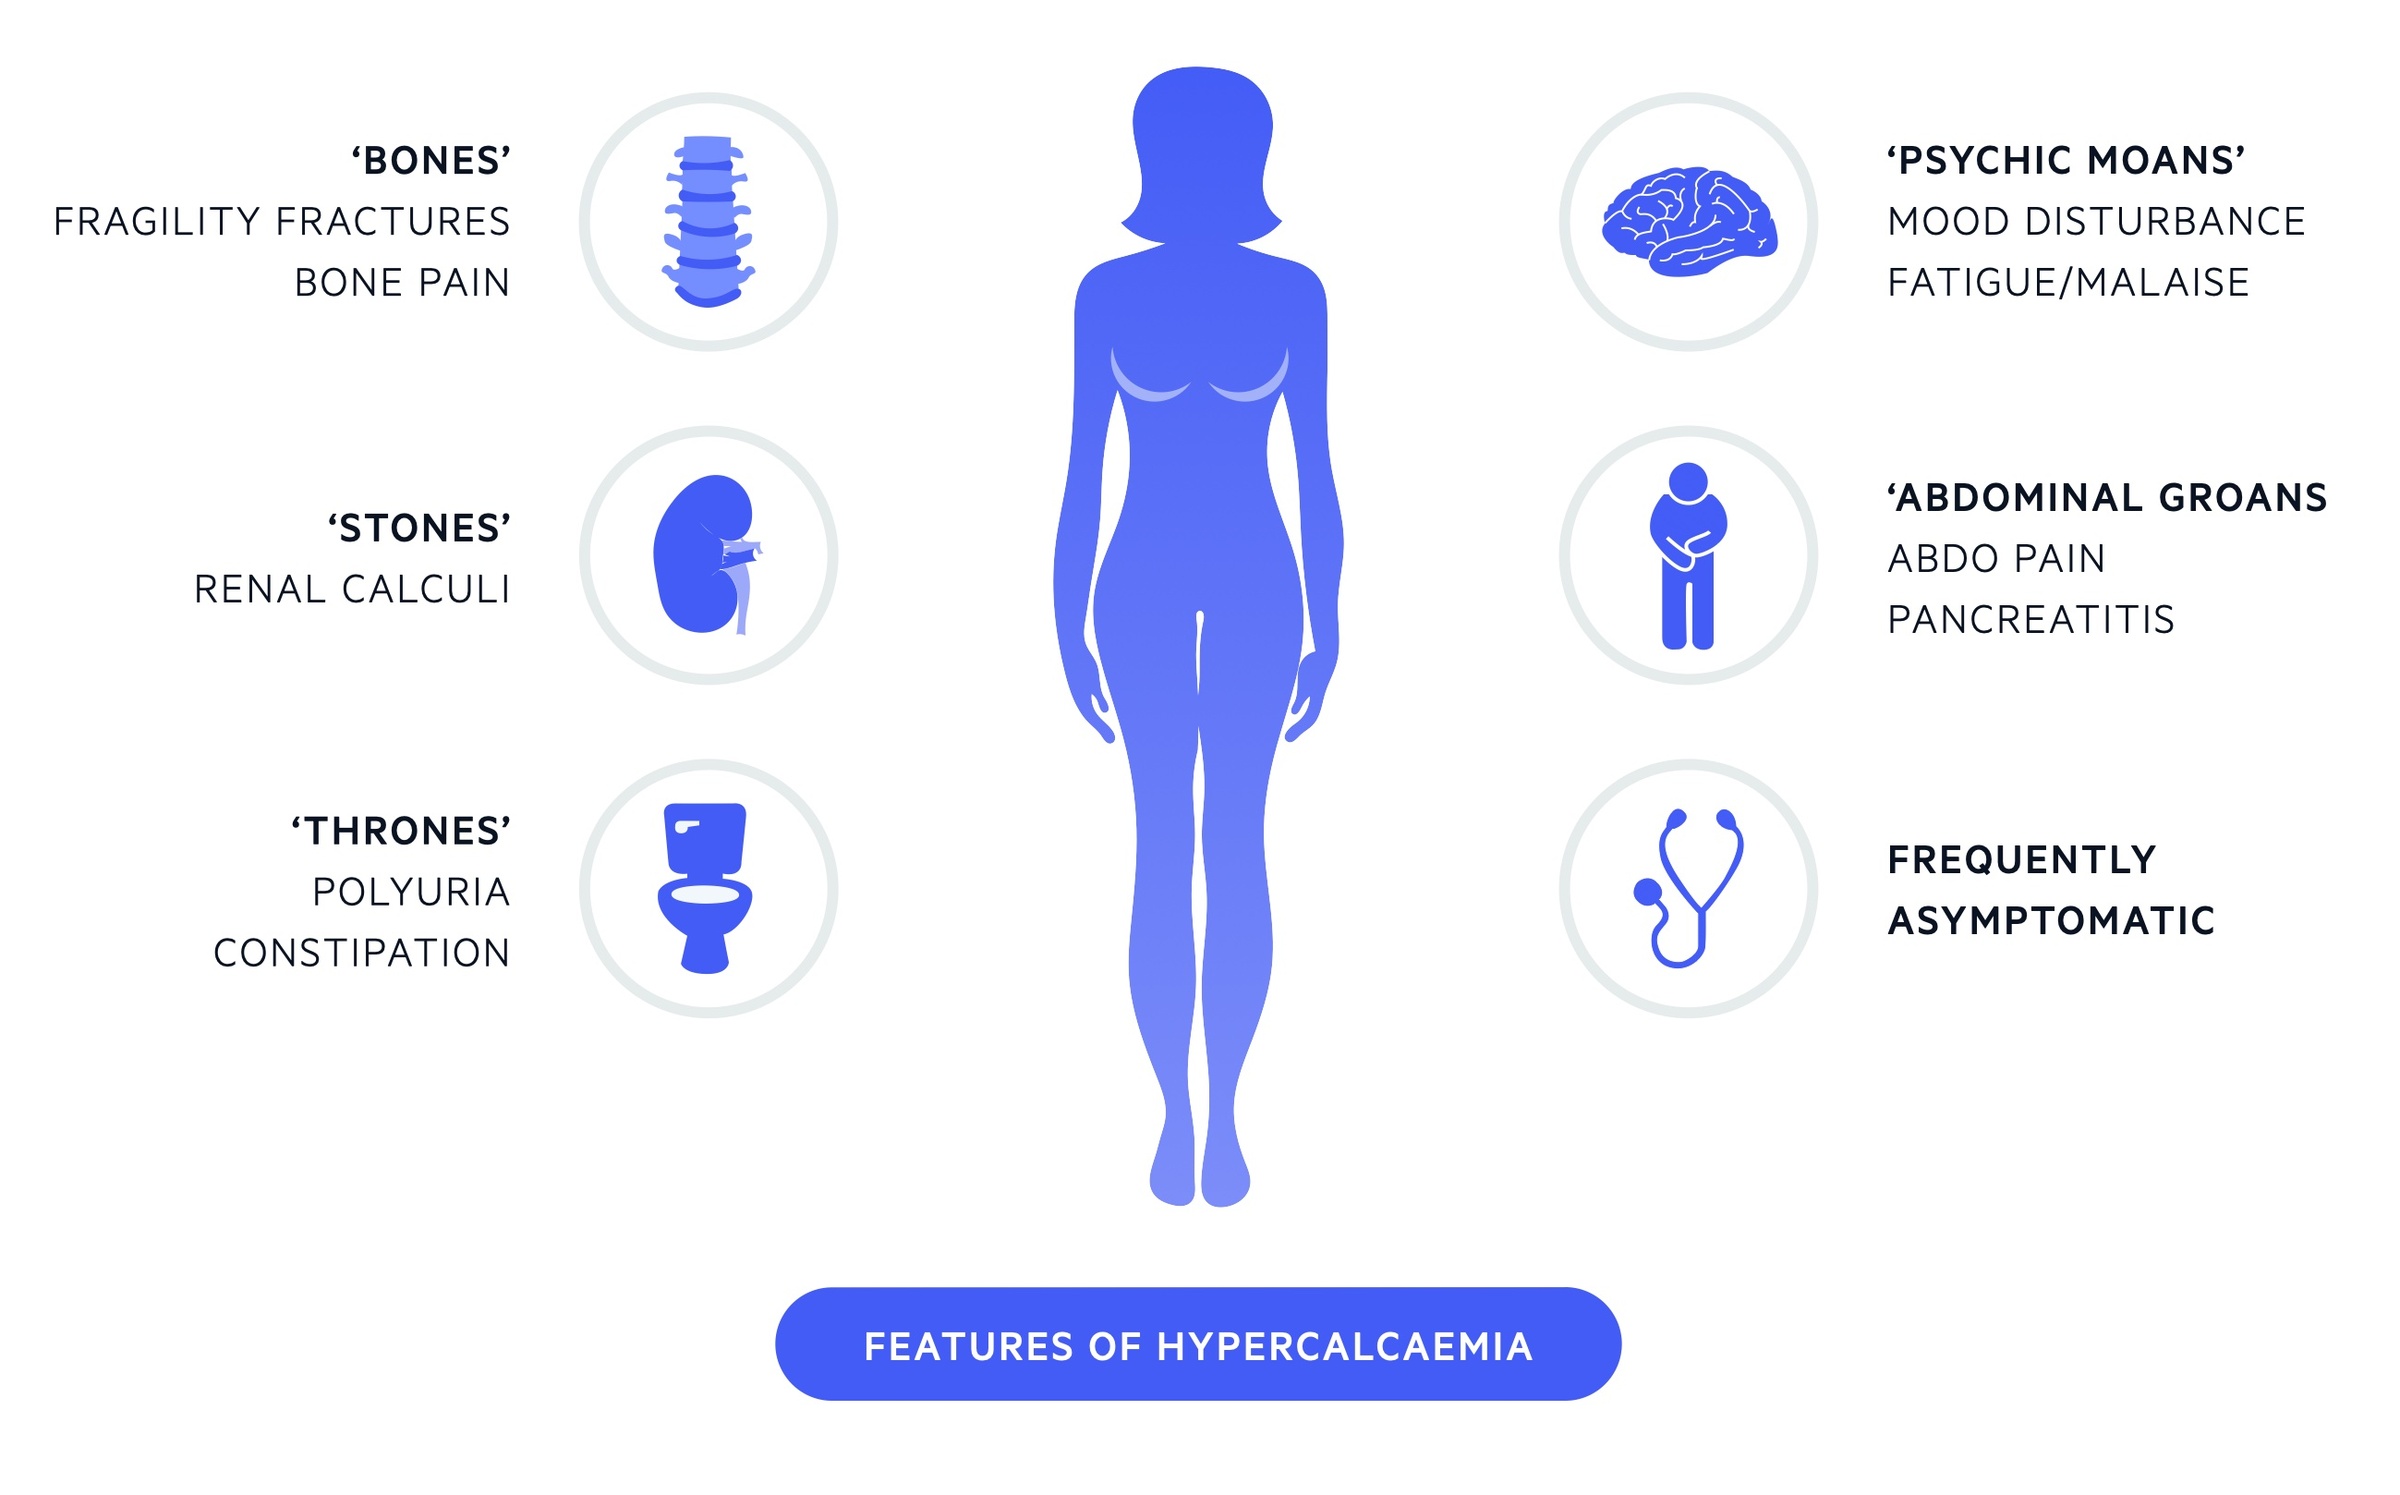 Features of hypercalcaemia